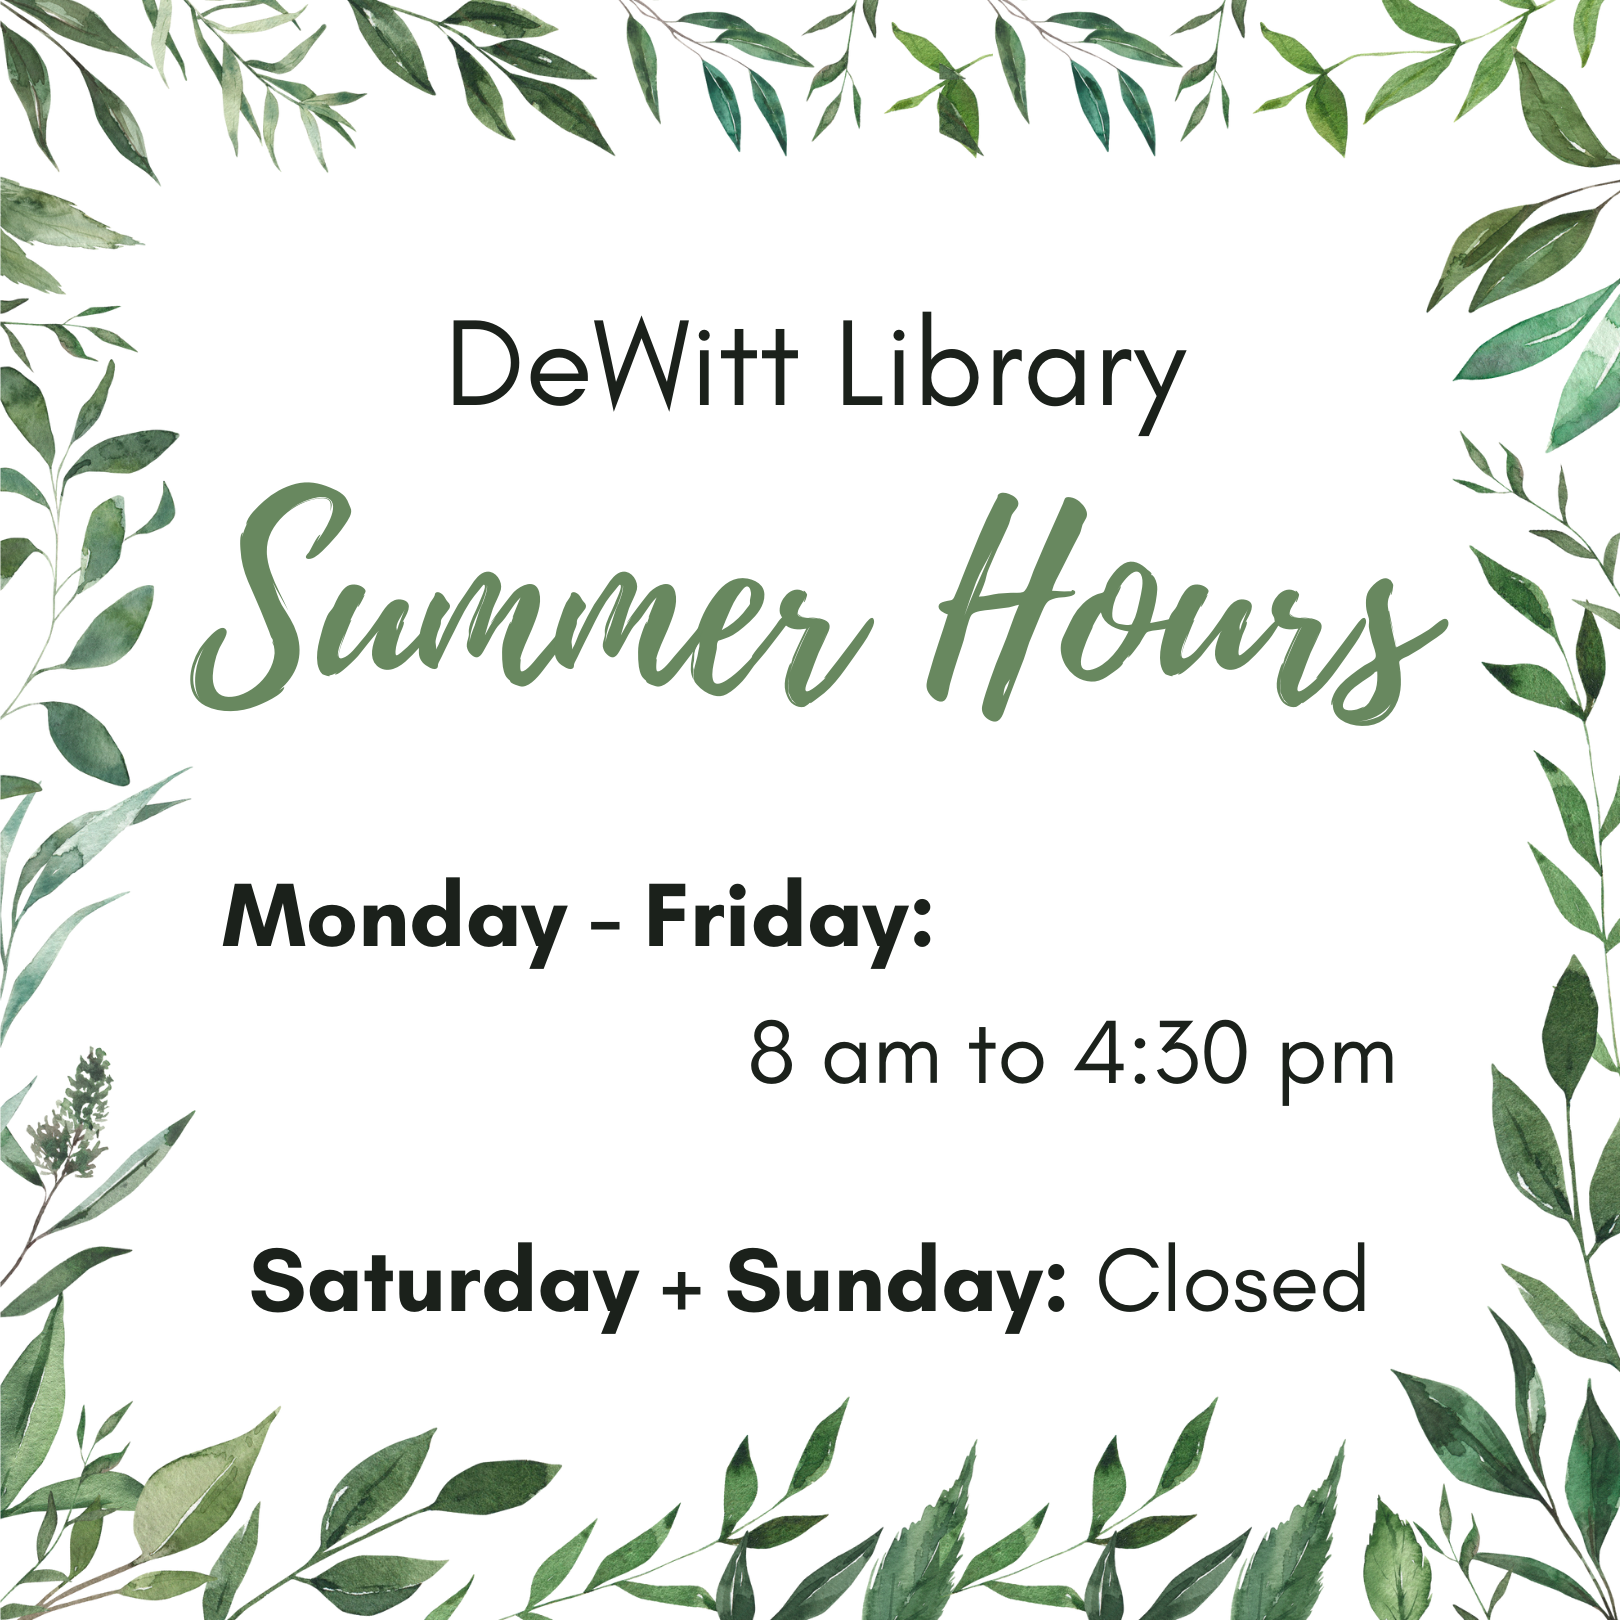 DeWitt Library August 1 - 14 Hours: Monday - Friday:  8 am to 4:30 pm and Saturday + Sunday: Closed